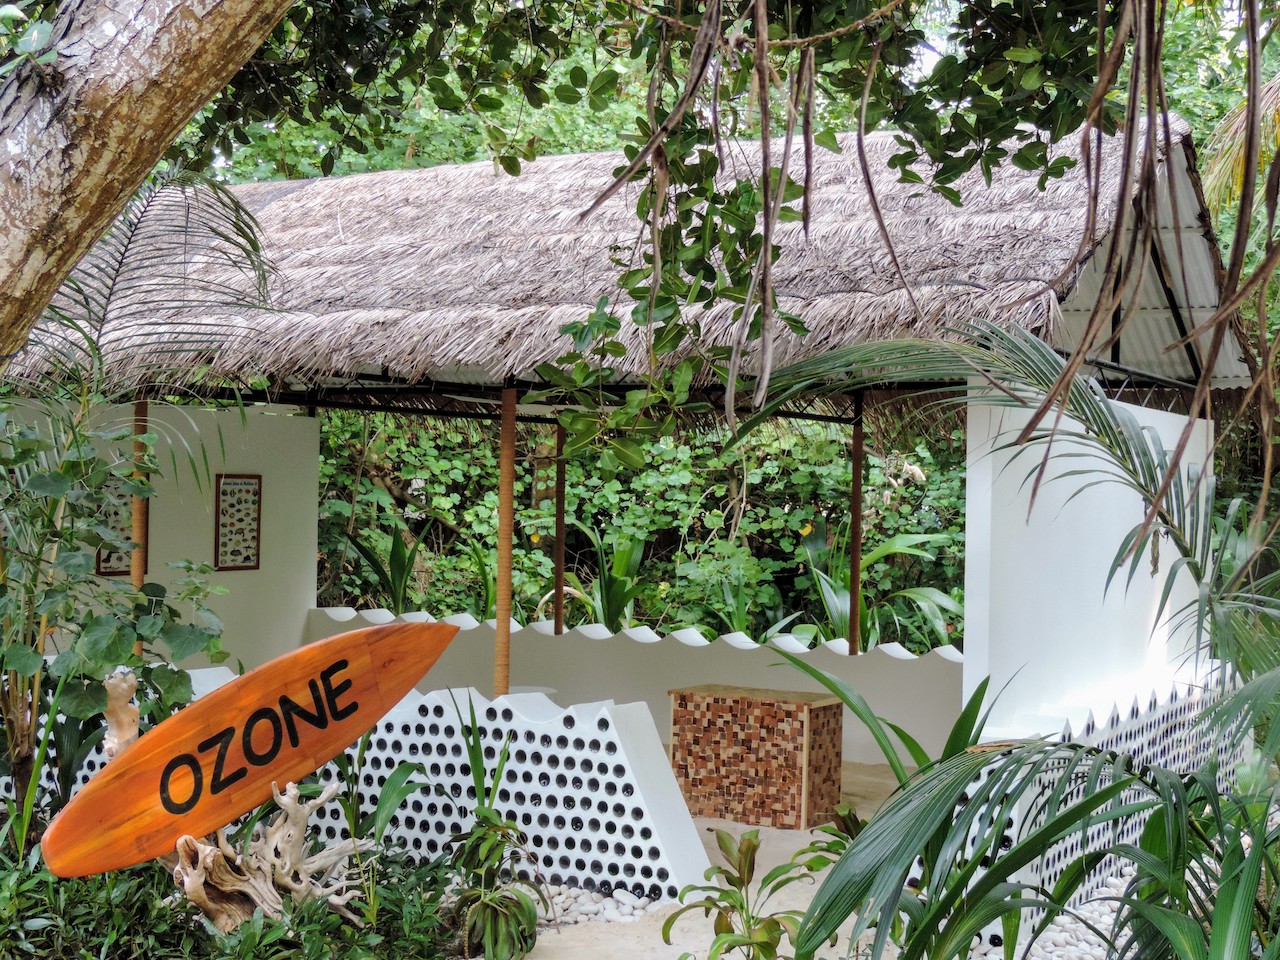 The sustainable OZONE Hut – made for presentations and talks on marine life at the Outrigger